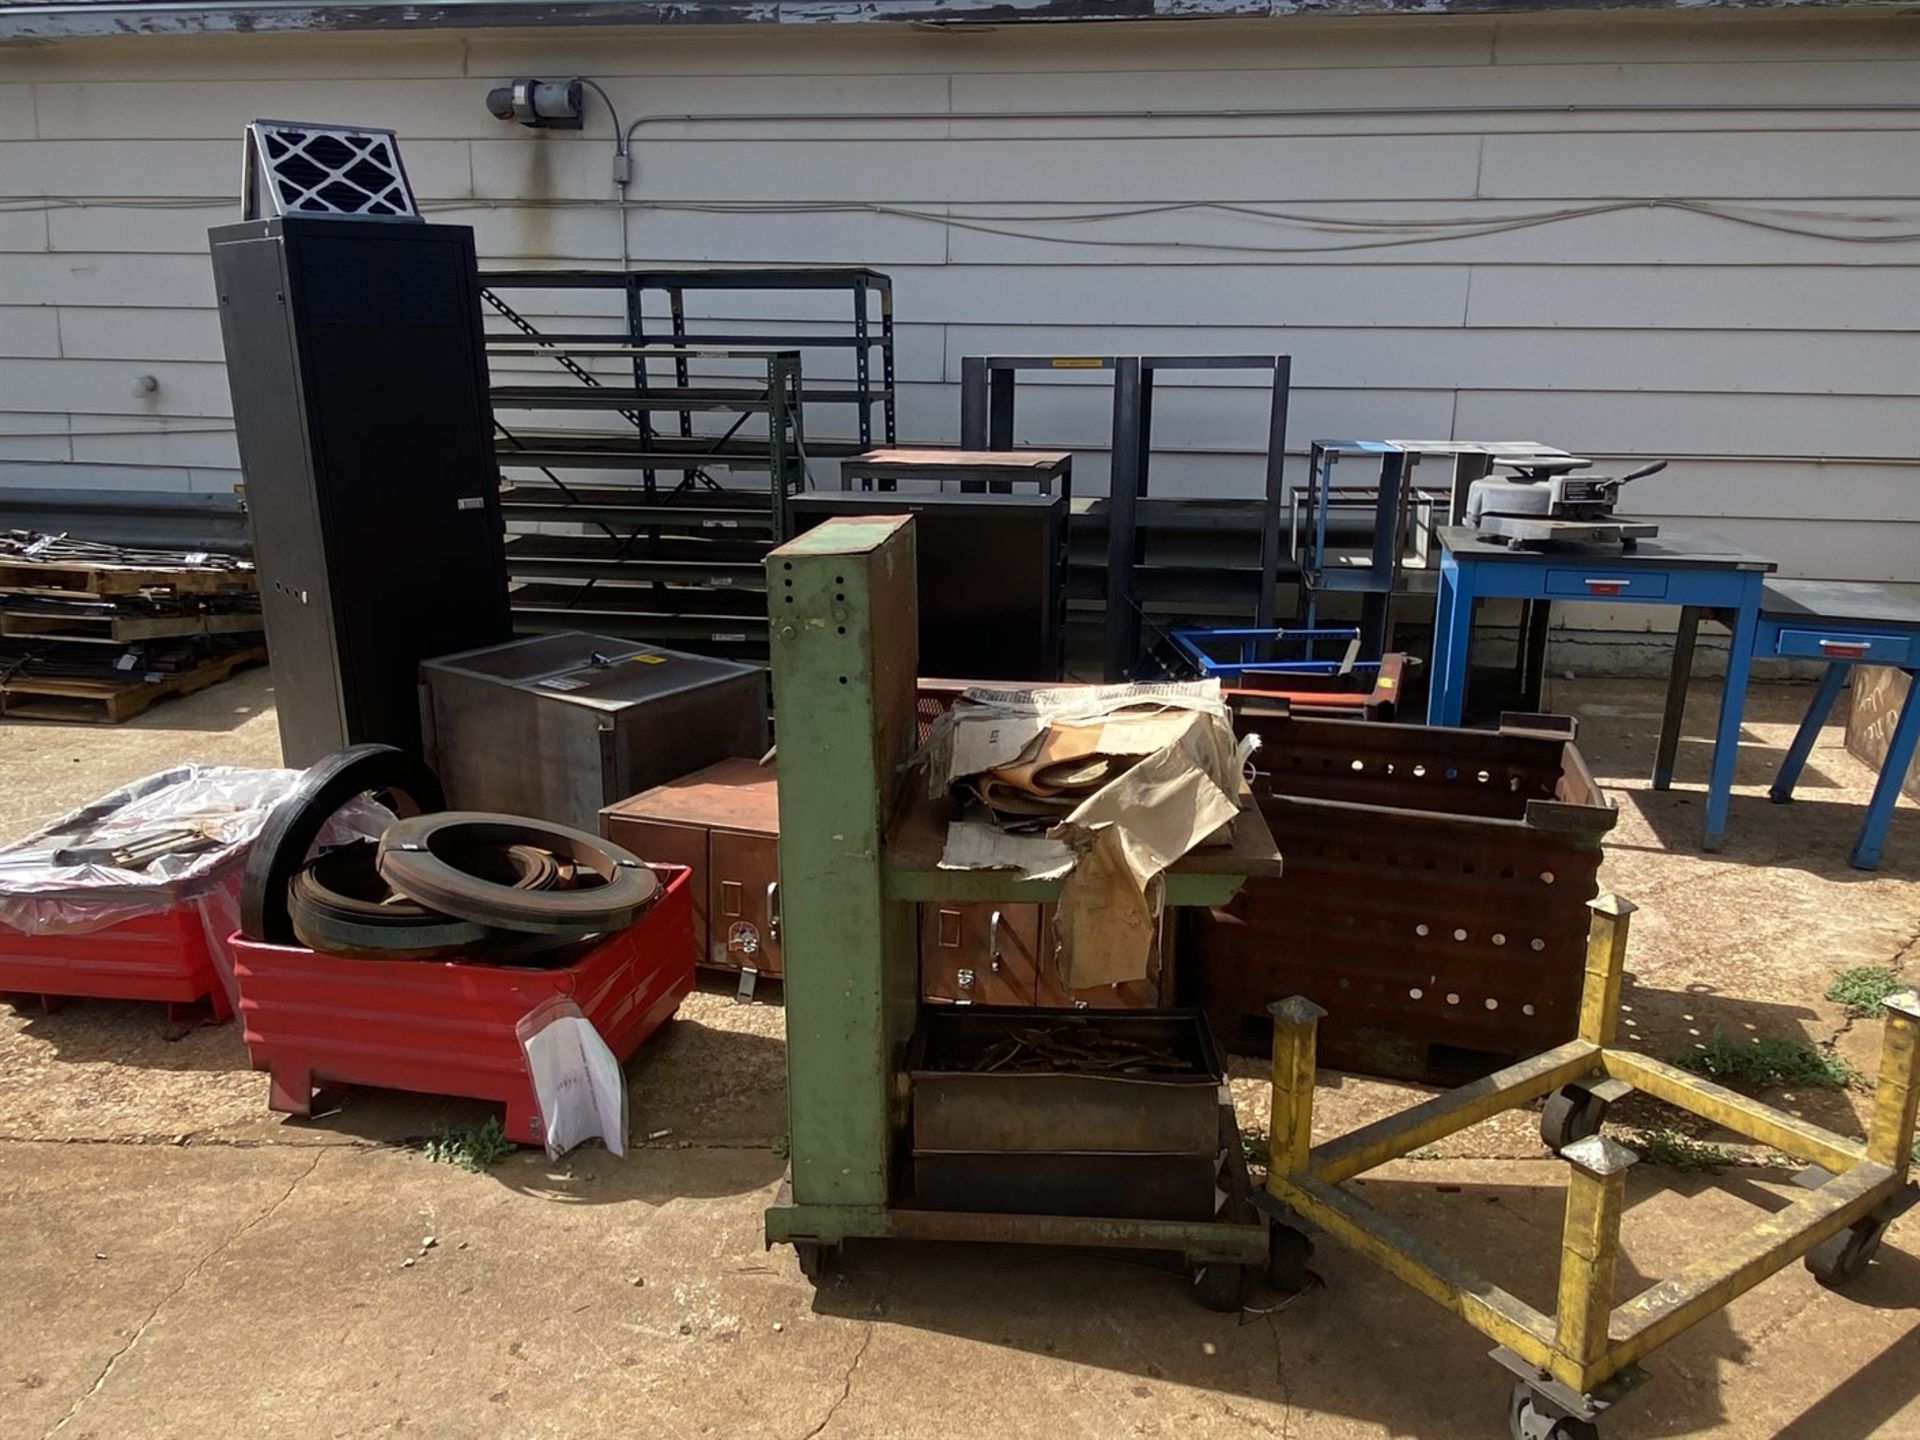 Lot of Assorted Shop Racks, Steel Tubs, and Tables - Image 2 of 3